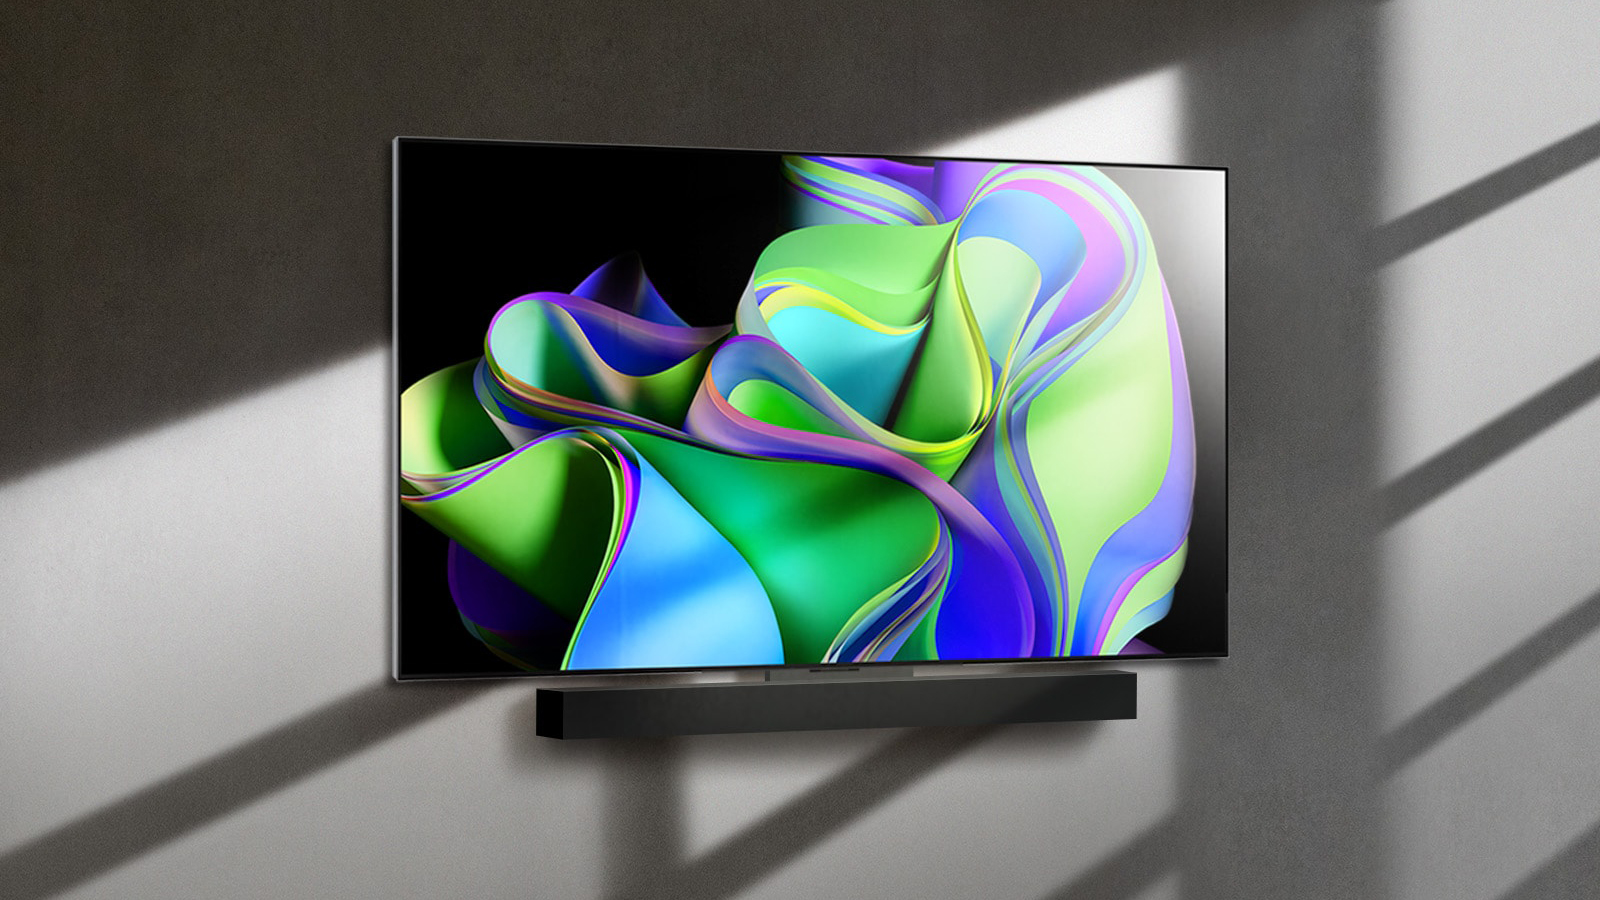 LG says OLED TV sales are down this year due to lack of supply from… LG